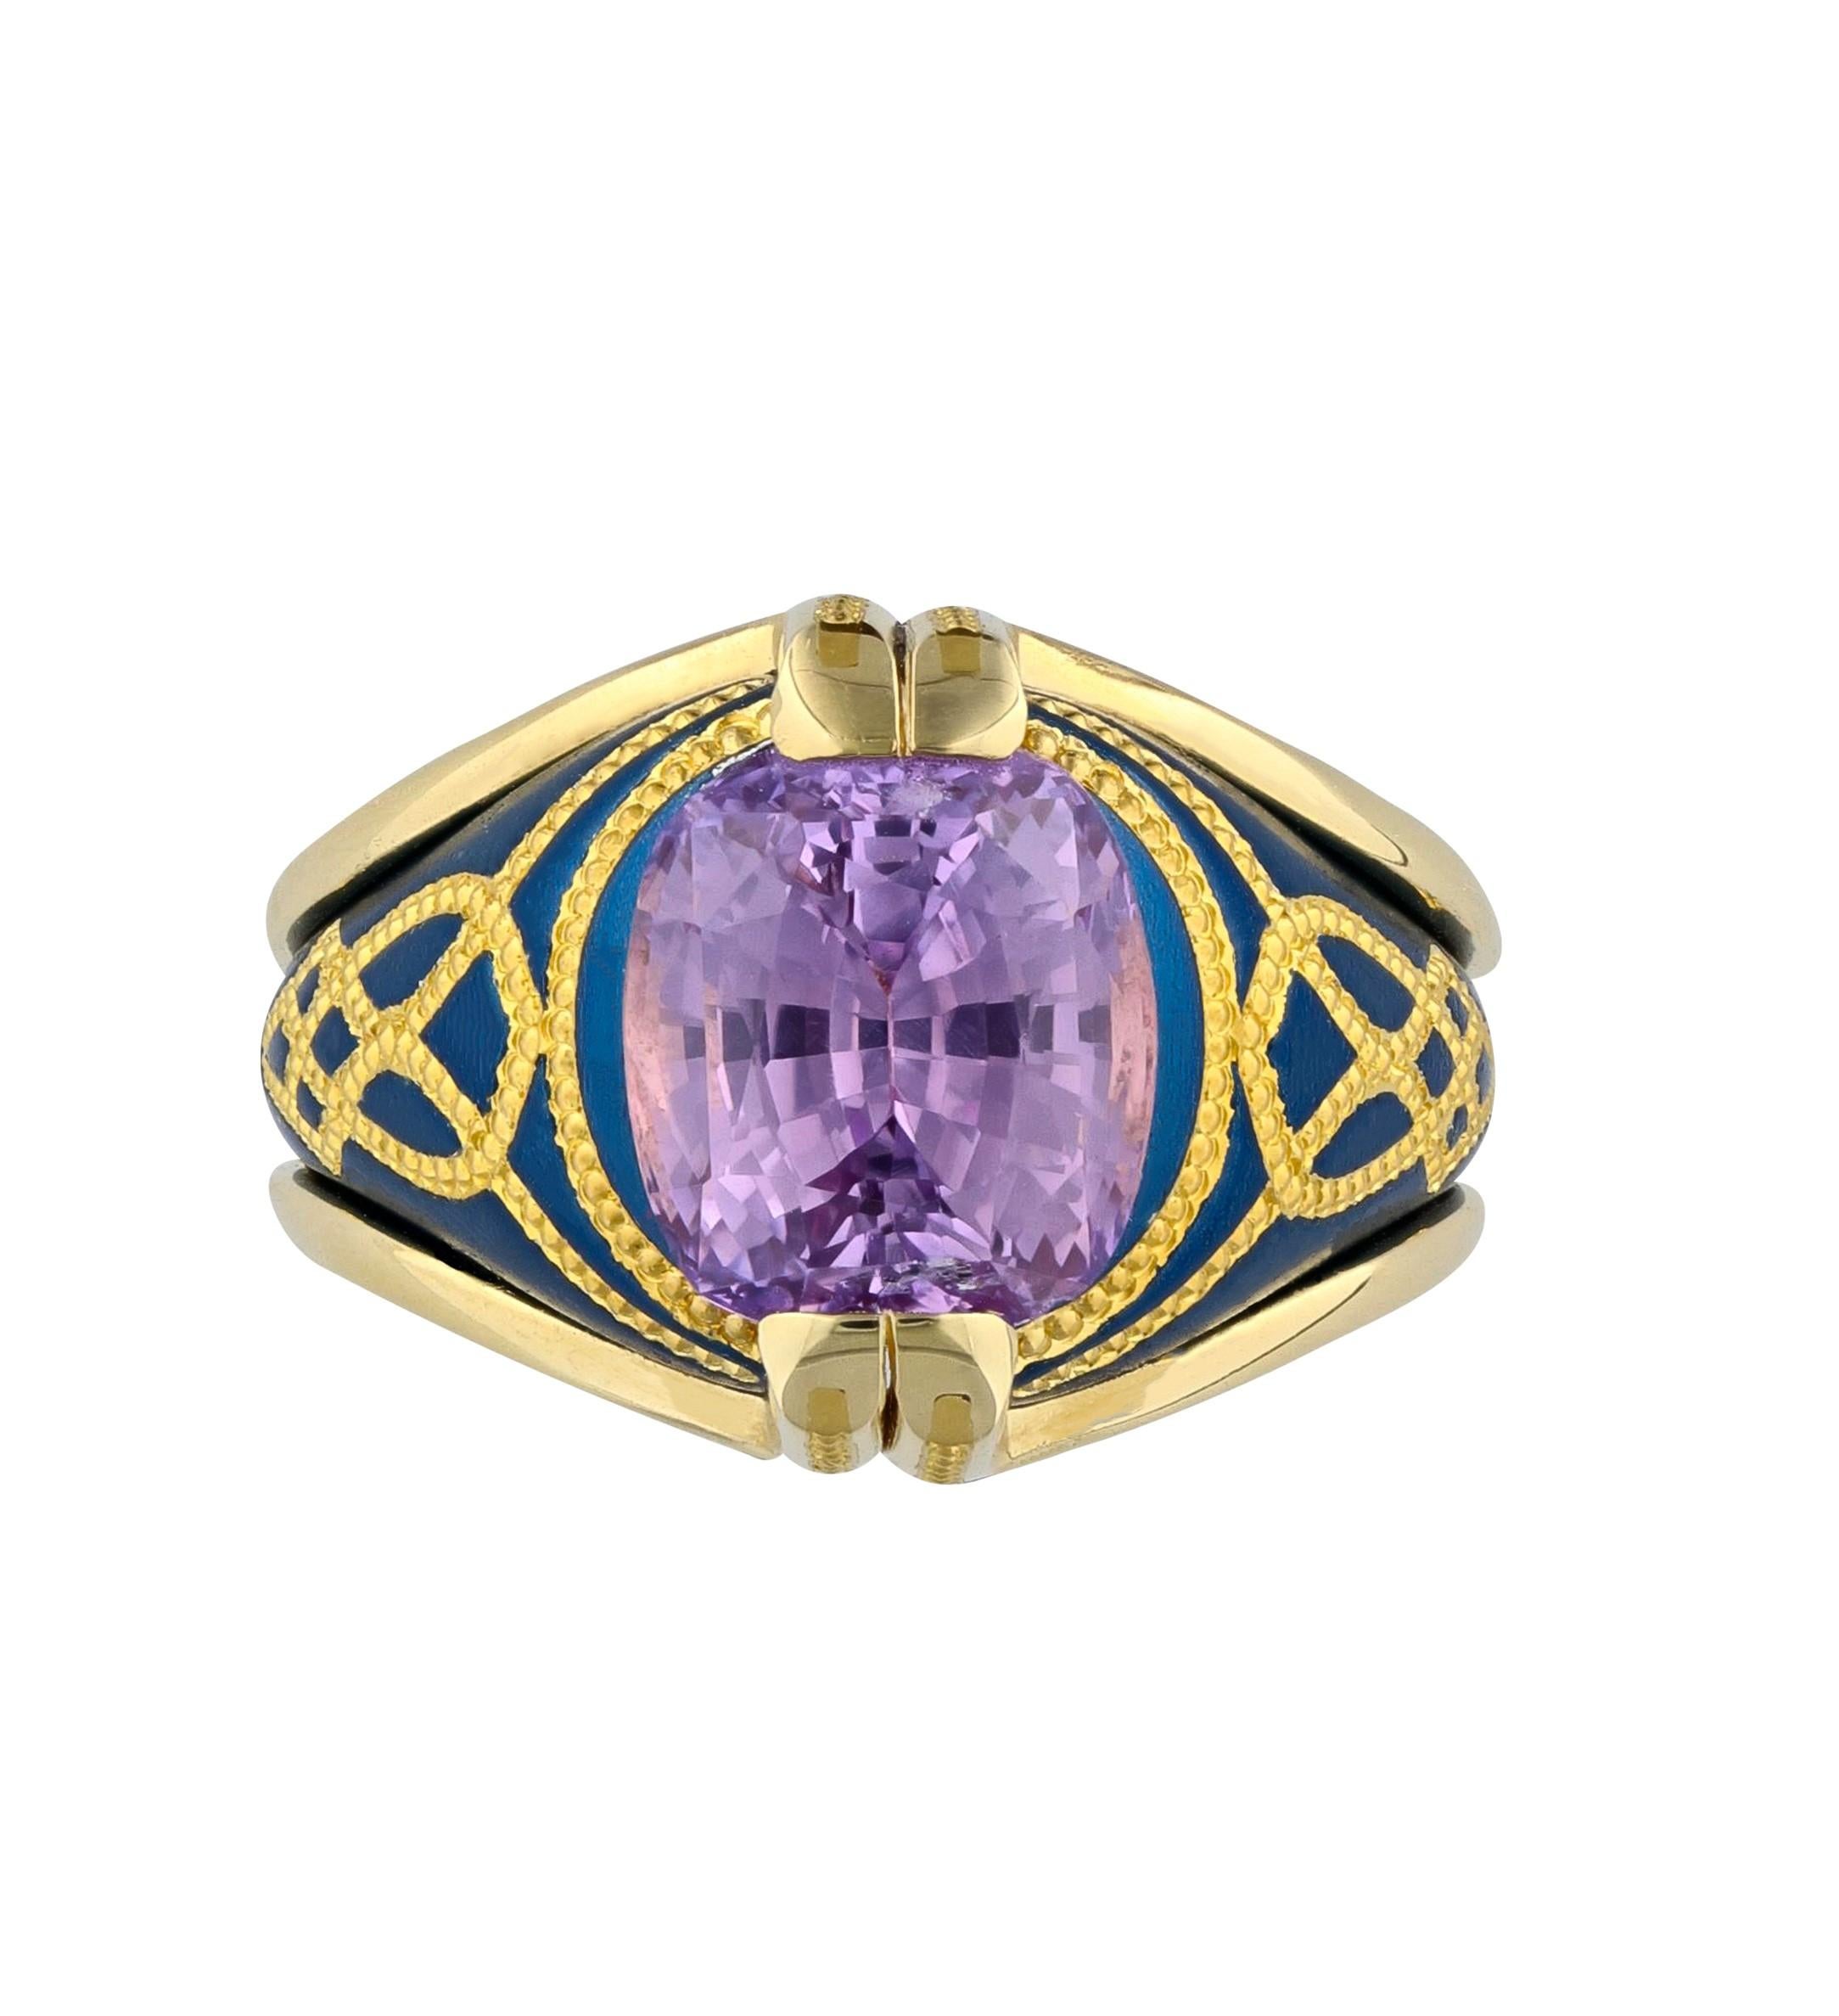 One of a kind 5.11 ct. Lavender Sapphire set in cobalt blue Aluminum with 24K Gold shaped inlay and 18K Gold frame. A unique innovation in mixed metals seen nowhere else.

